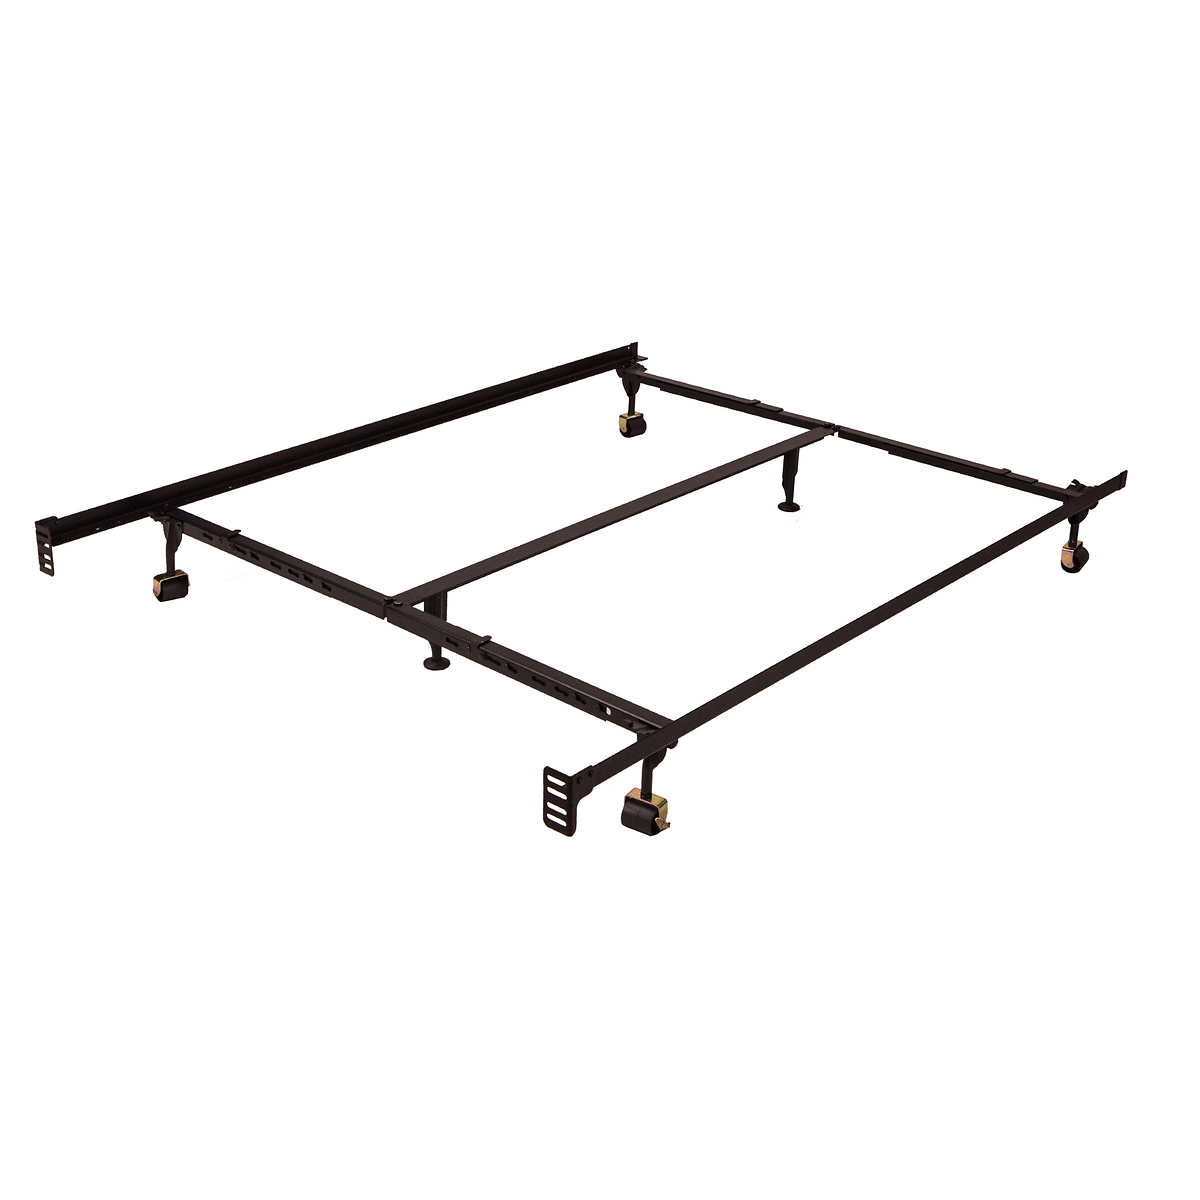 Premium Universal Lev R Lock Bed Frame, Dimensions Of A California King Size Bed Frame